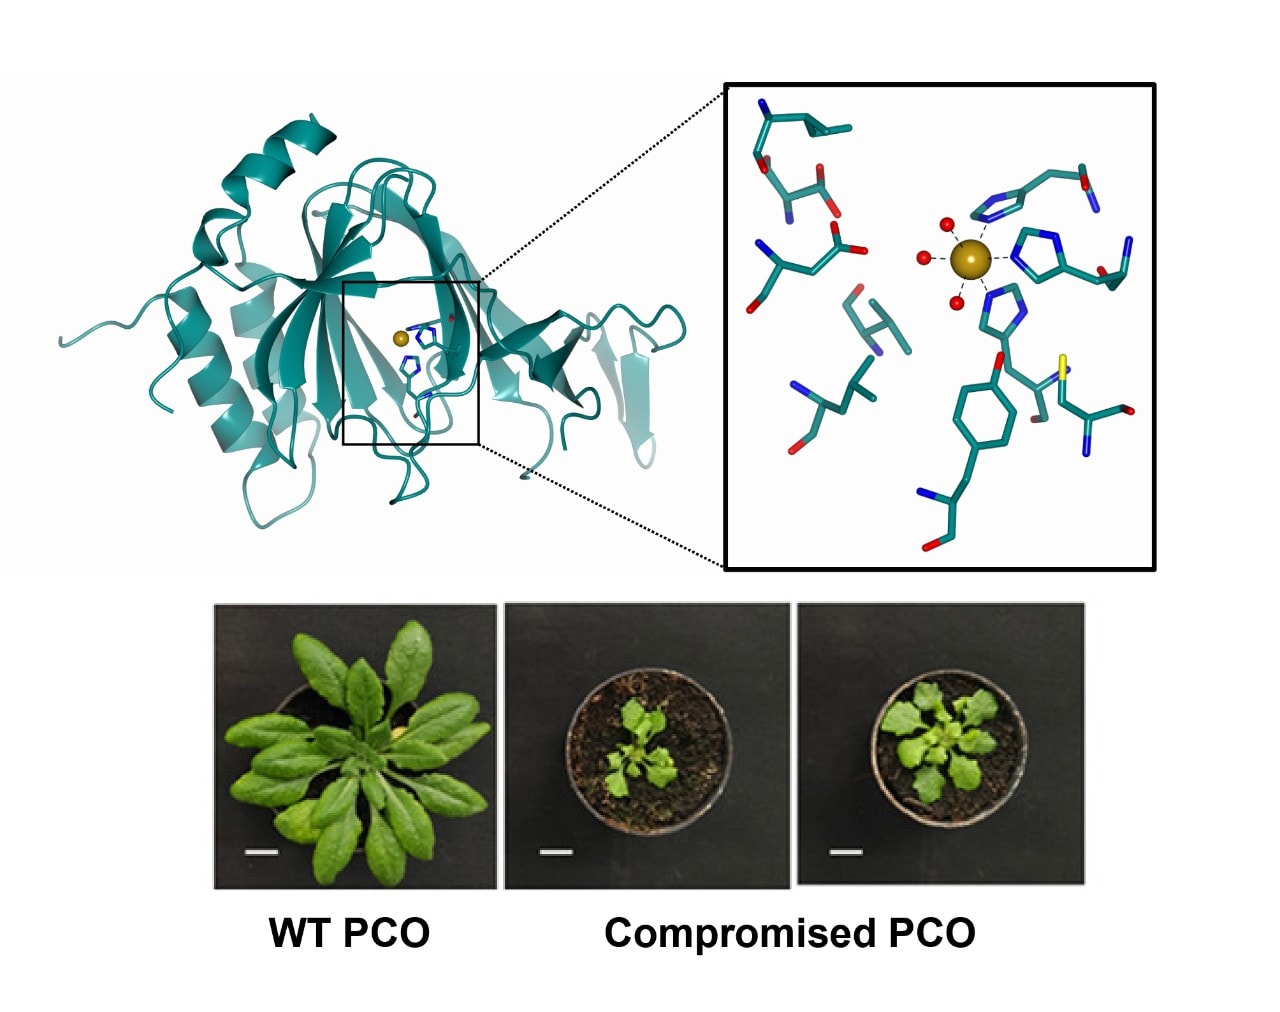 Crystal structure of PCO4, with comparison of 'wild type' (WT) crop and affected crop.